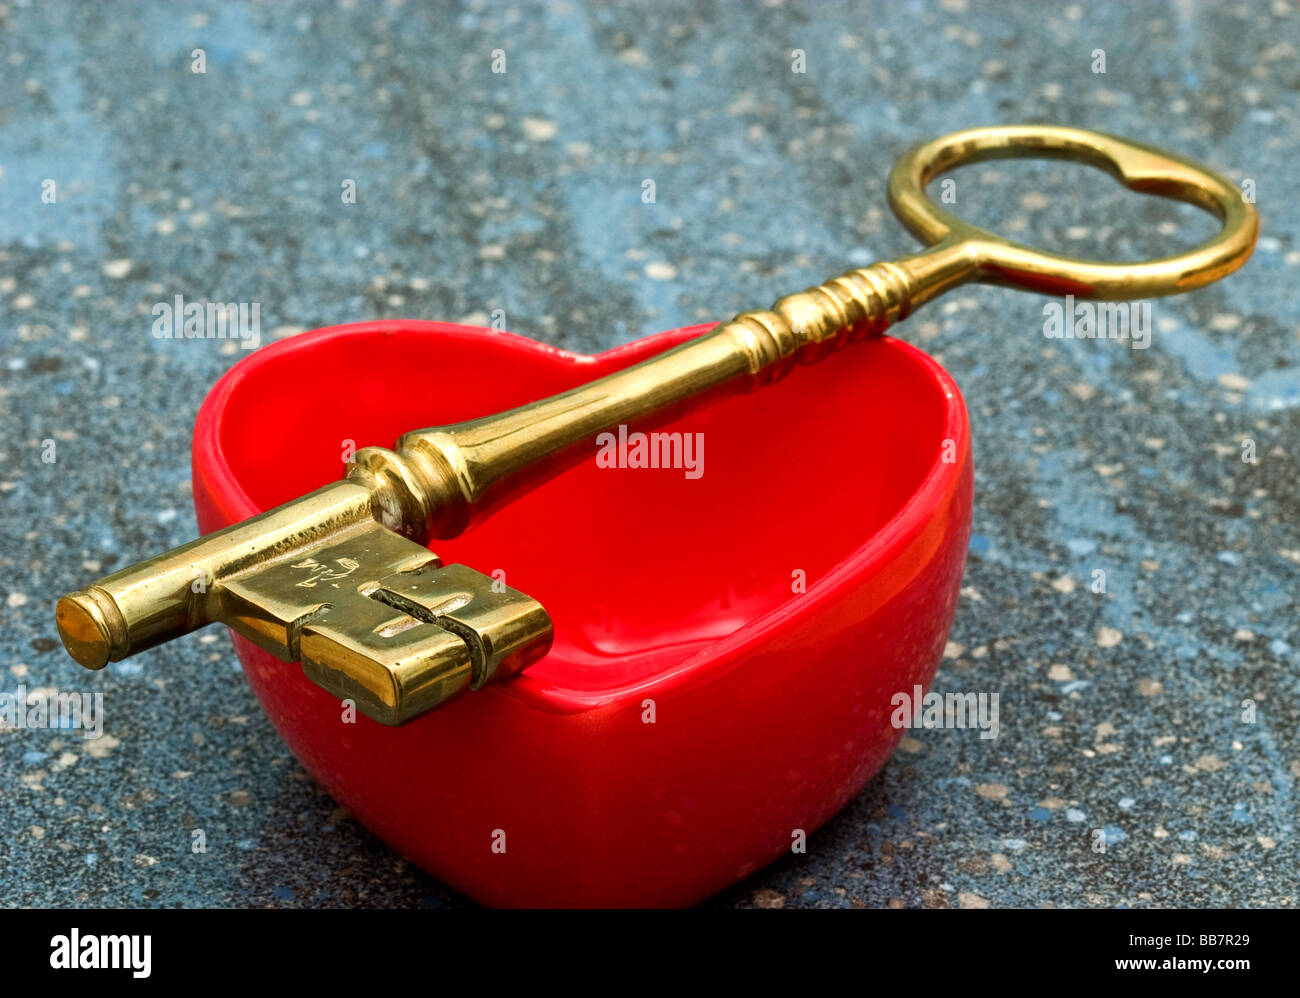 Large golden metallic key over a red heart shaped dish Stock Photo